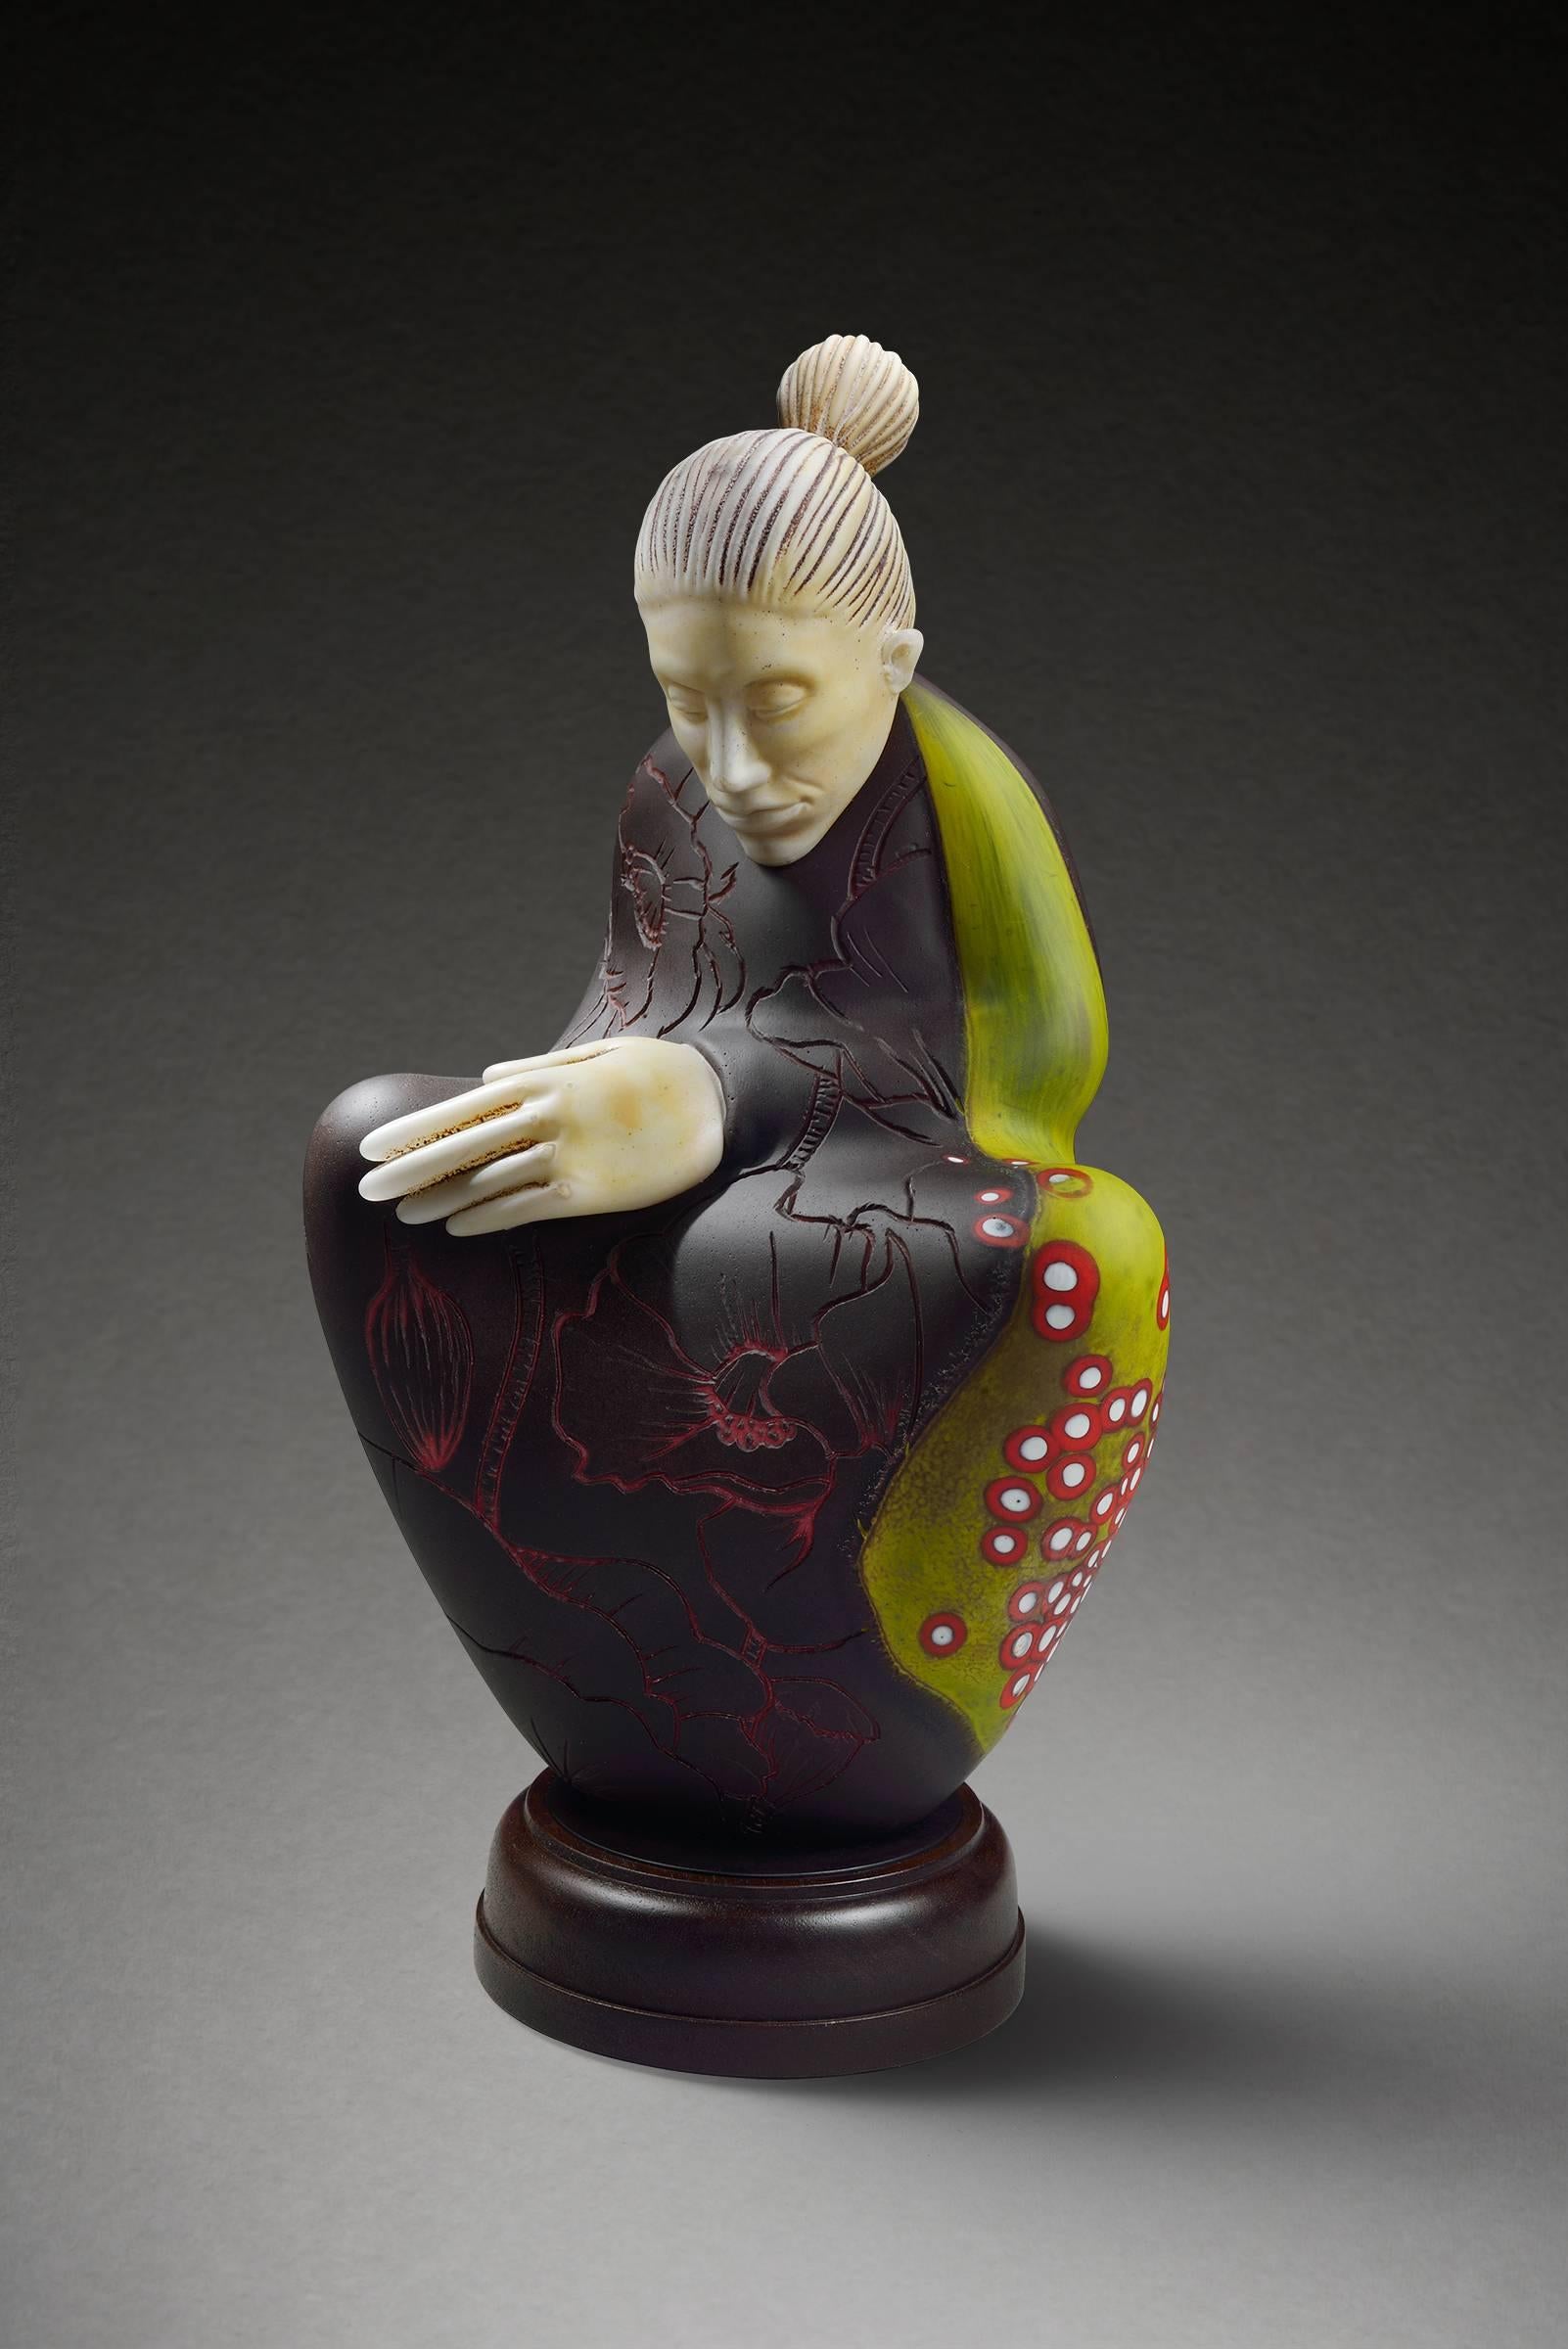 Ross Richmond Figurative Sculpture - "Among the Poppies", Blown and Hot Sculpted Glass Sculpture with Carved Detail